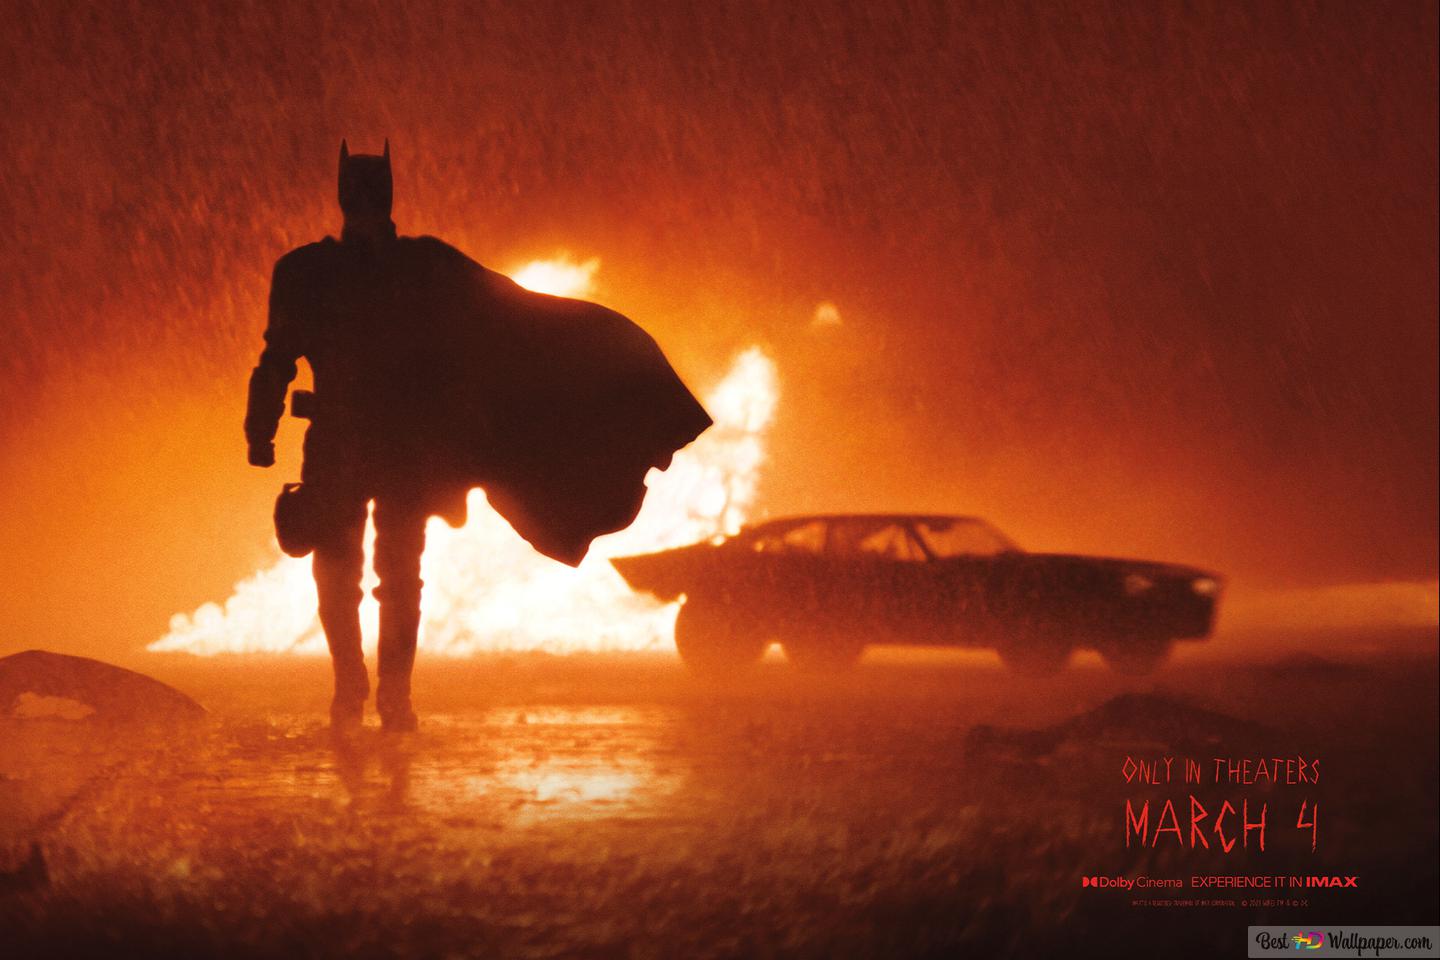 A shot of batman and her car in the batman movie fire HD wallpaper download